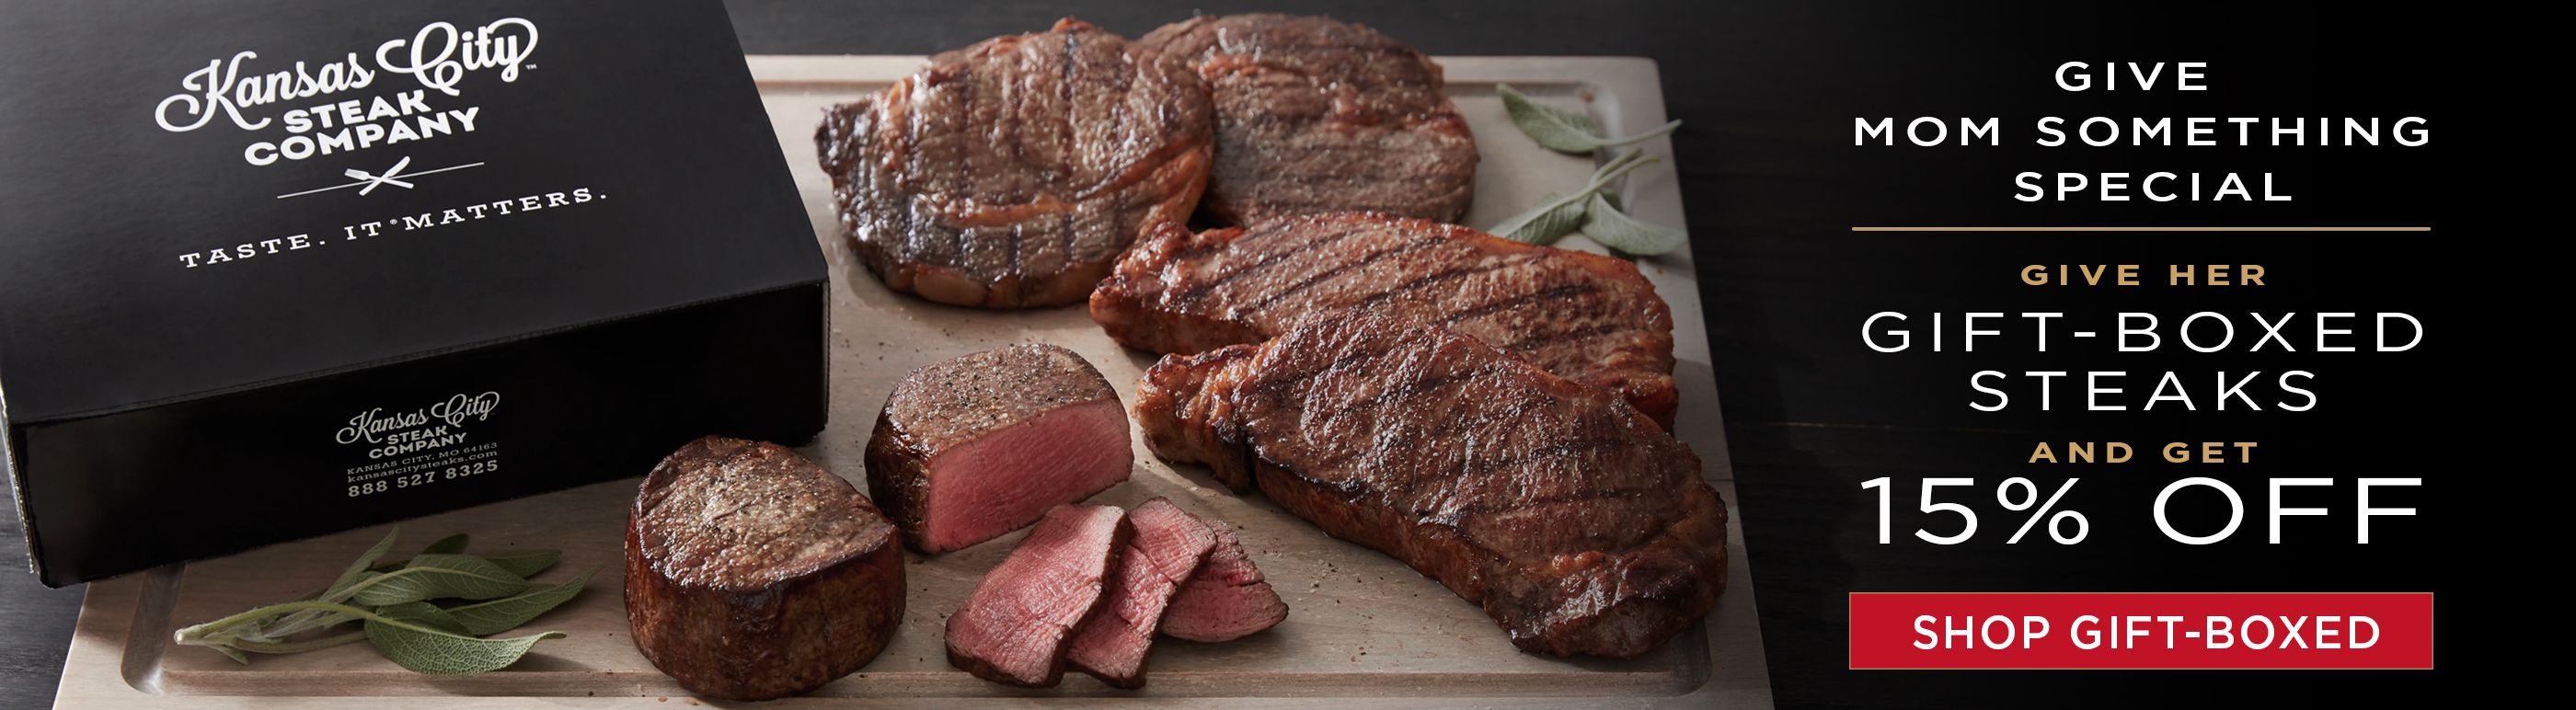 Give Mom something special. Give her gift-boxed steaks and get 15% off.